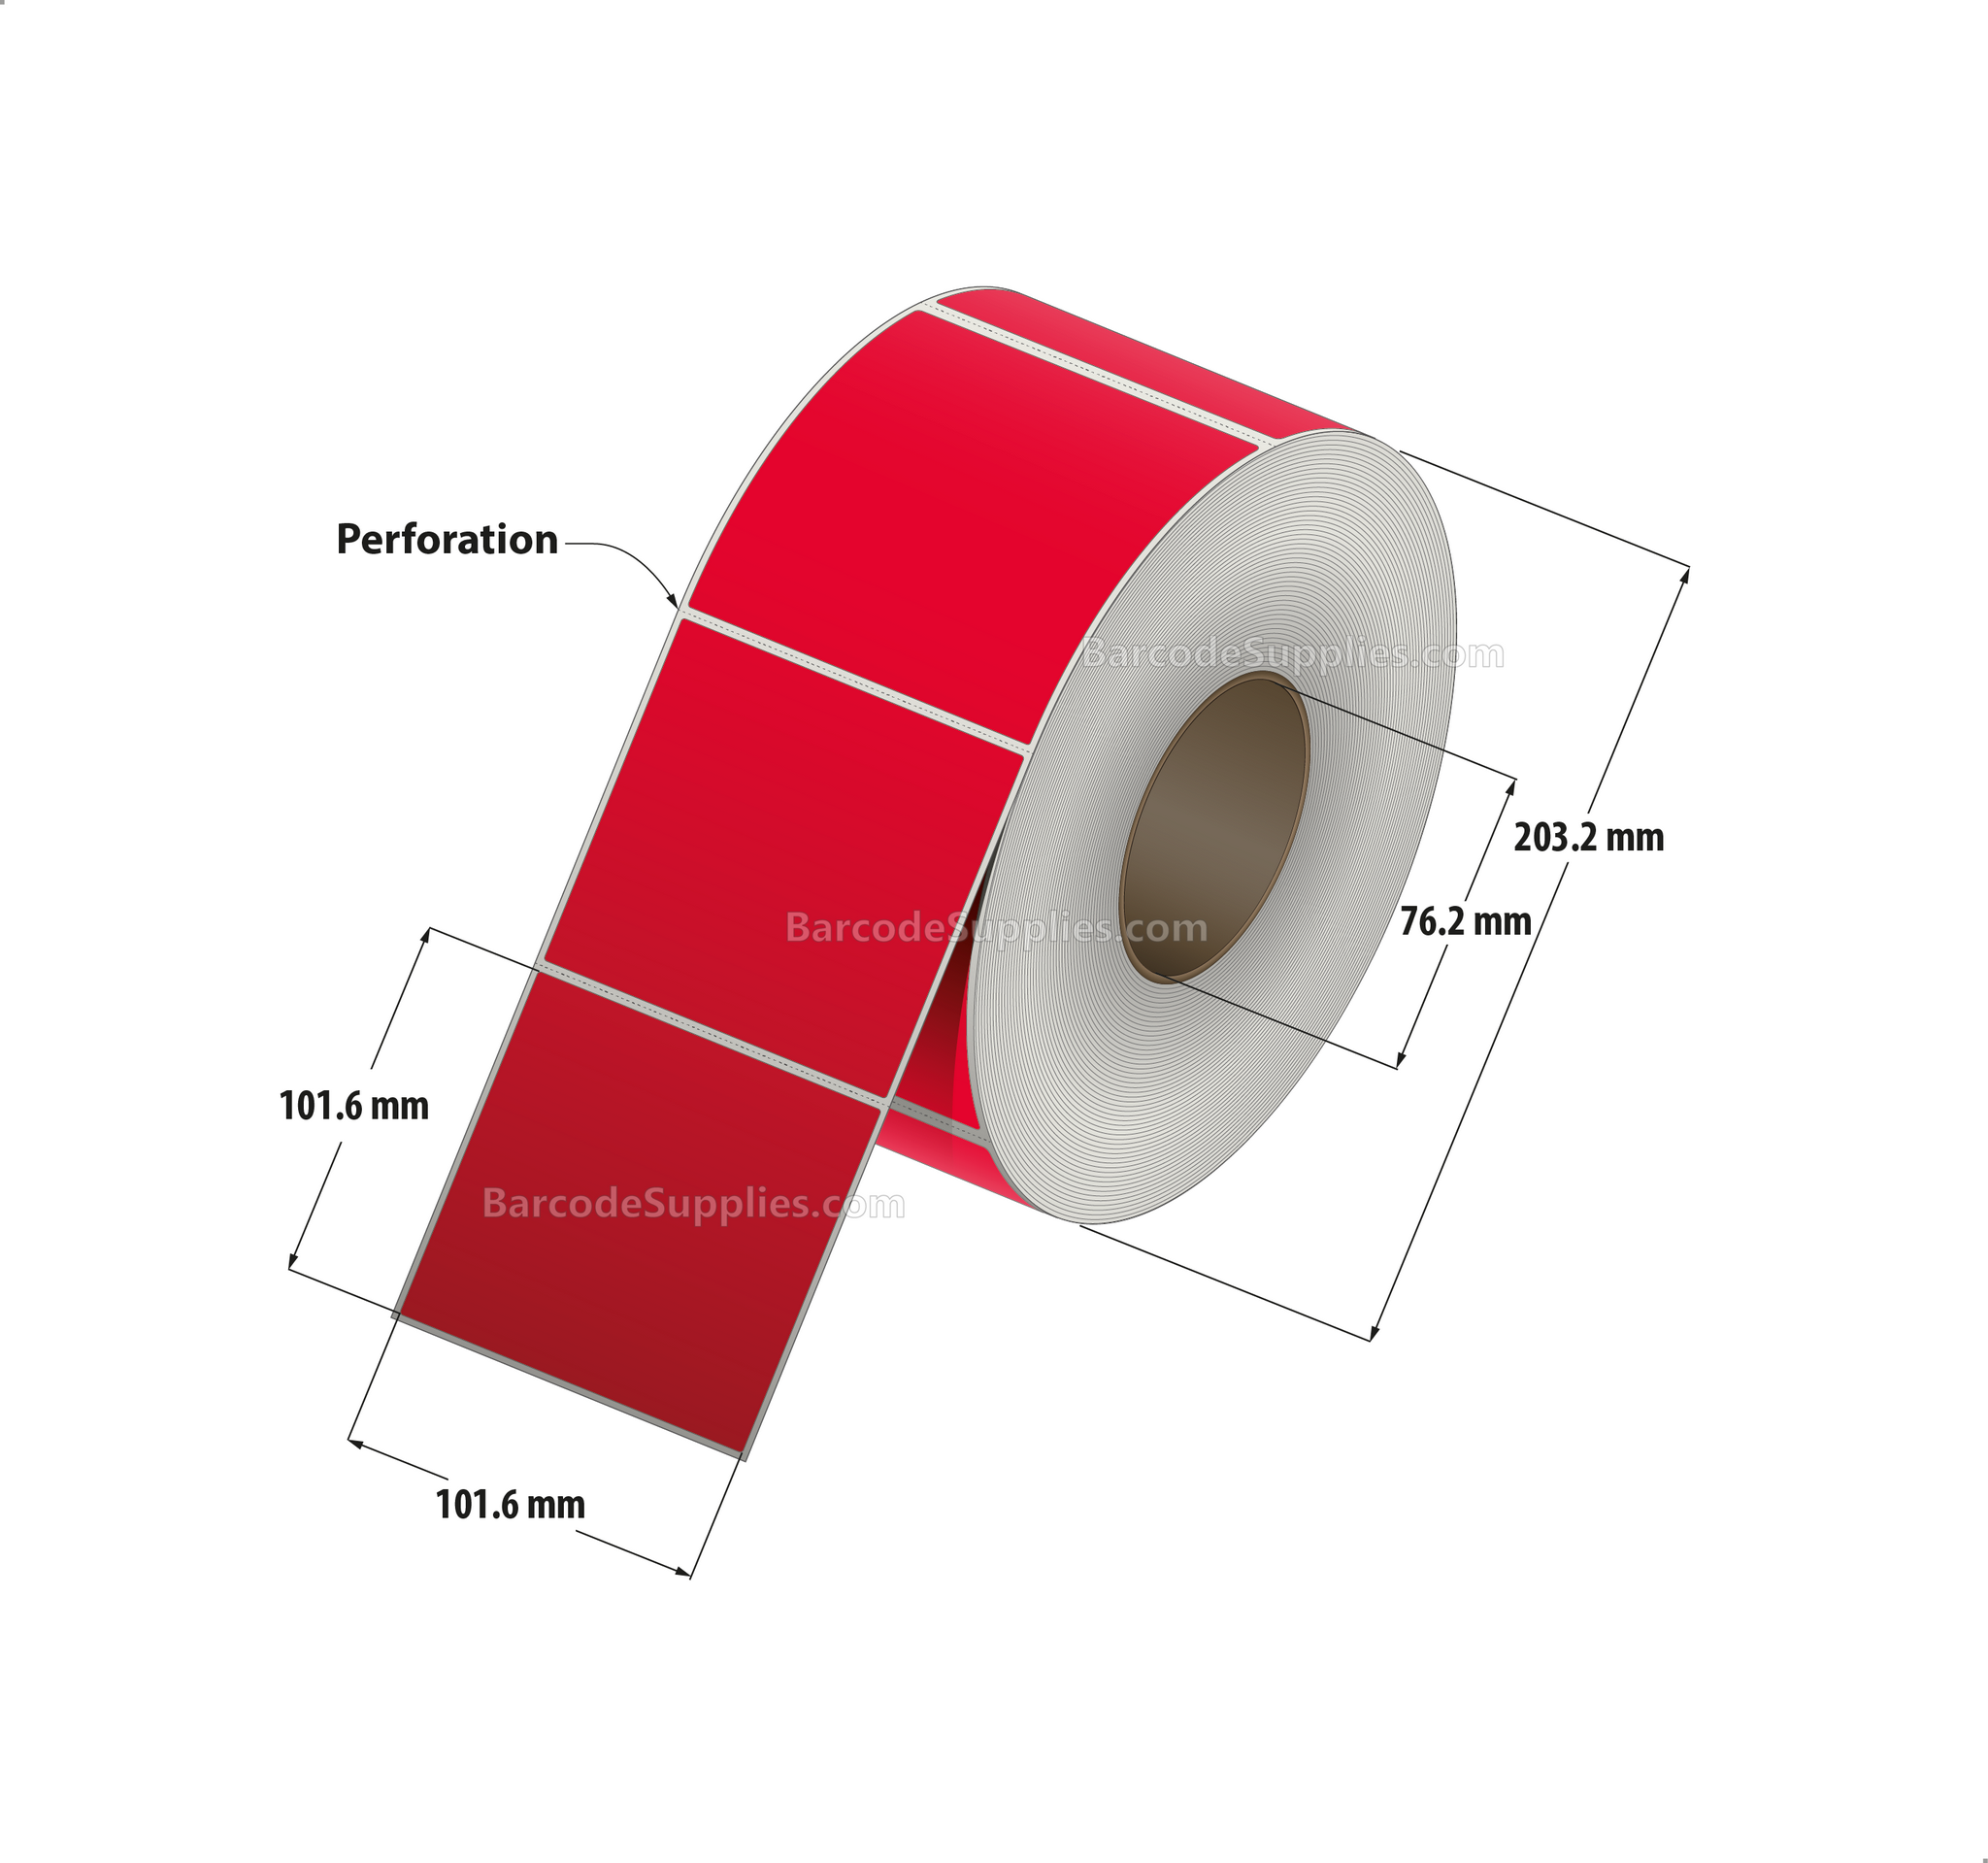 4 x 4 Thermal Transfer 032 Red Labels With Permanent Adhesive - Perforated - 1500 Labels Per Roll - Carton Of 4 Rolls - 6000 Labels Total - MPN: RFC-4-4-1500-RD